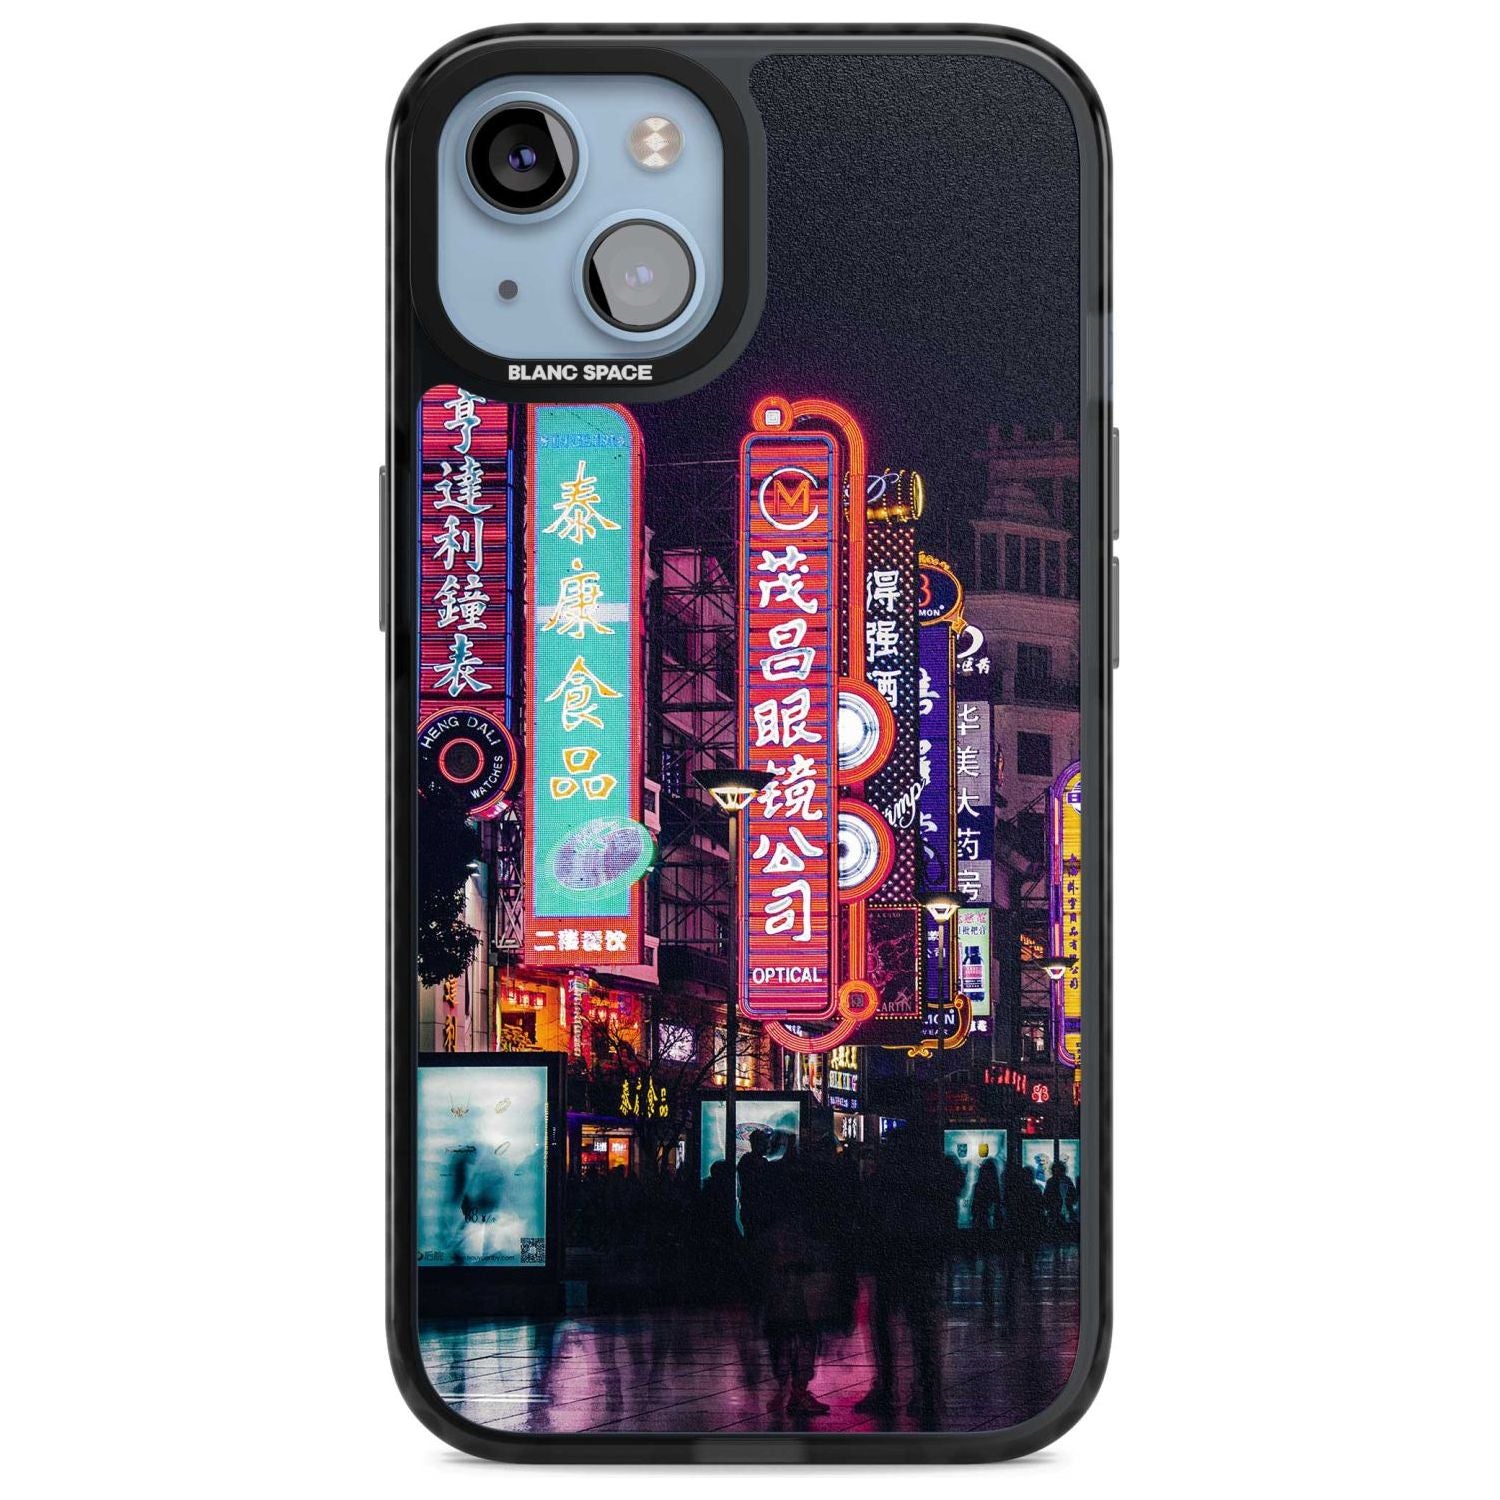 Busy Street - Neon Cities Photographs Phone Case iPhone 15 Plus / Magsafe Black Impact Case,iPhone 15 / Magsafe Black Impact Case,iPhone 14 Plus / Magsafe Black Impact Case,iPhone 14 / Magsafe Black Impact Case,iPhone 13 / Magsafe Black Impact Case Blanc Space